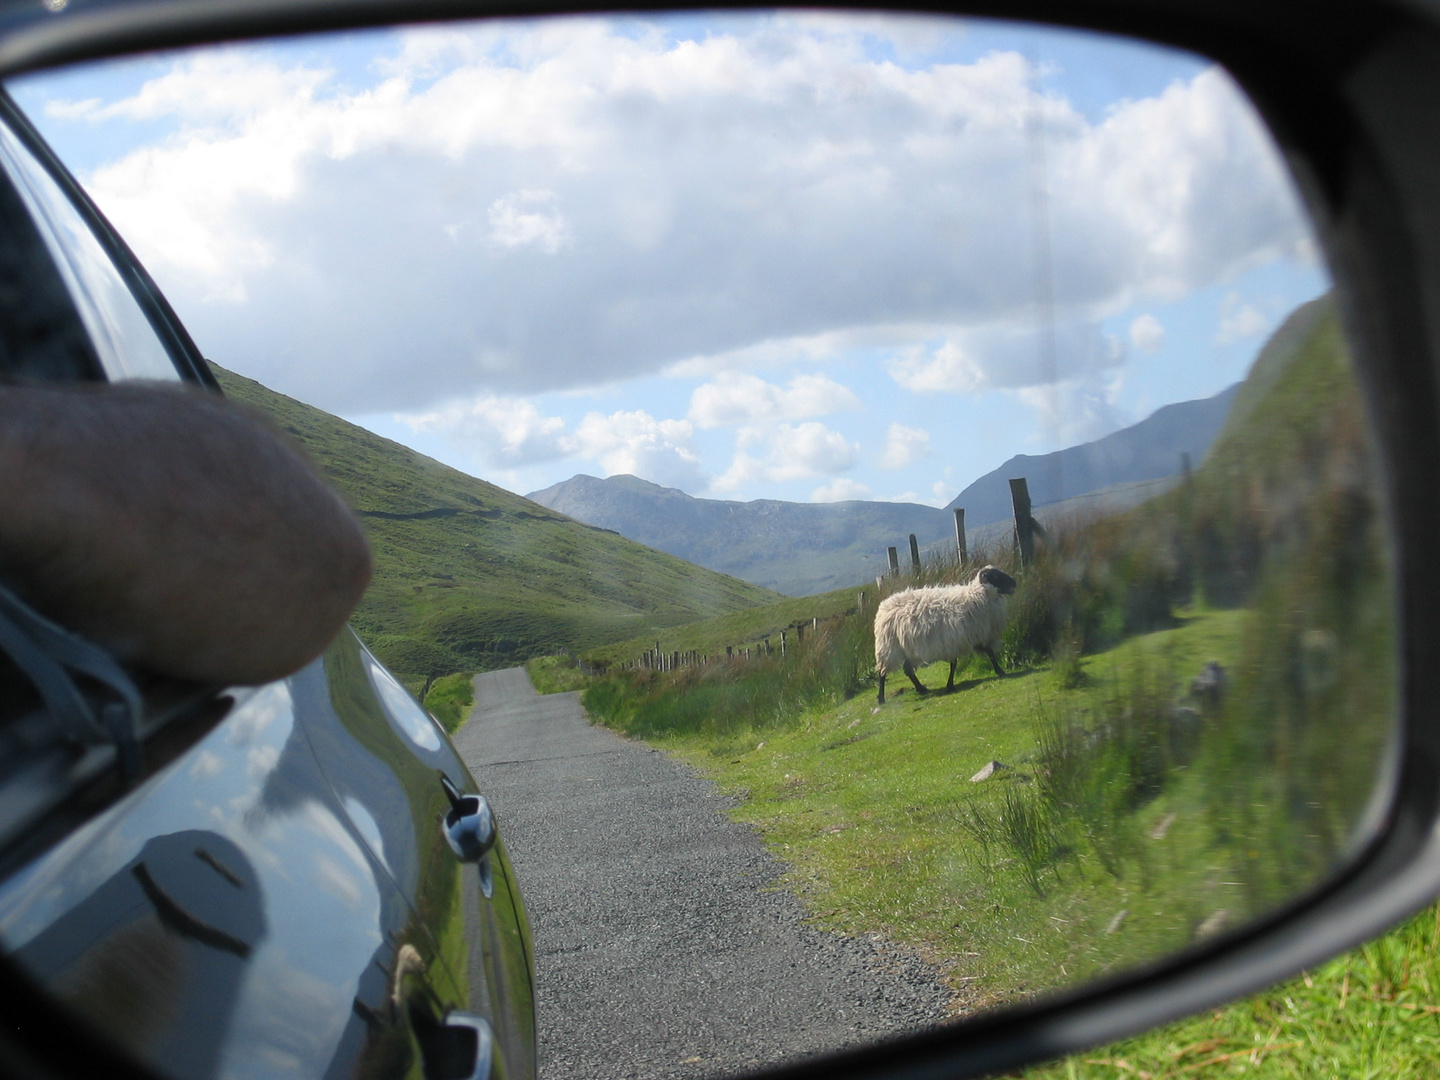 Sheep in the mirror